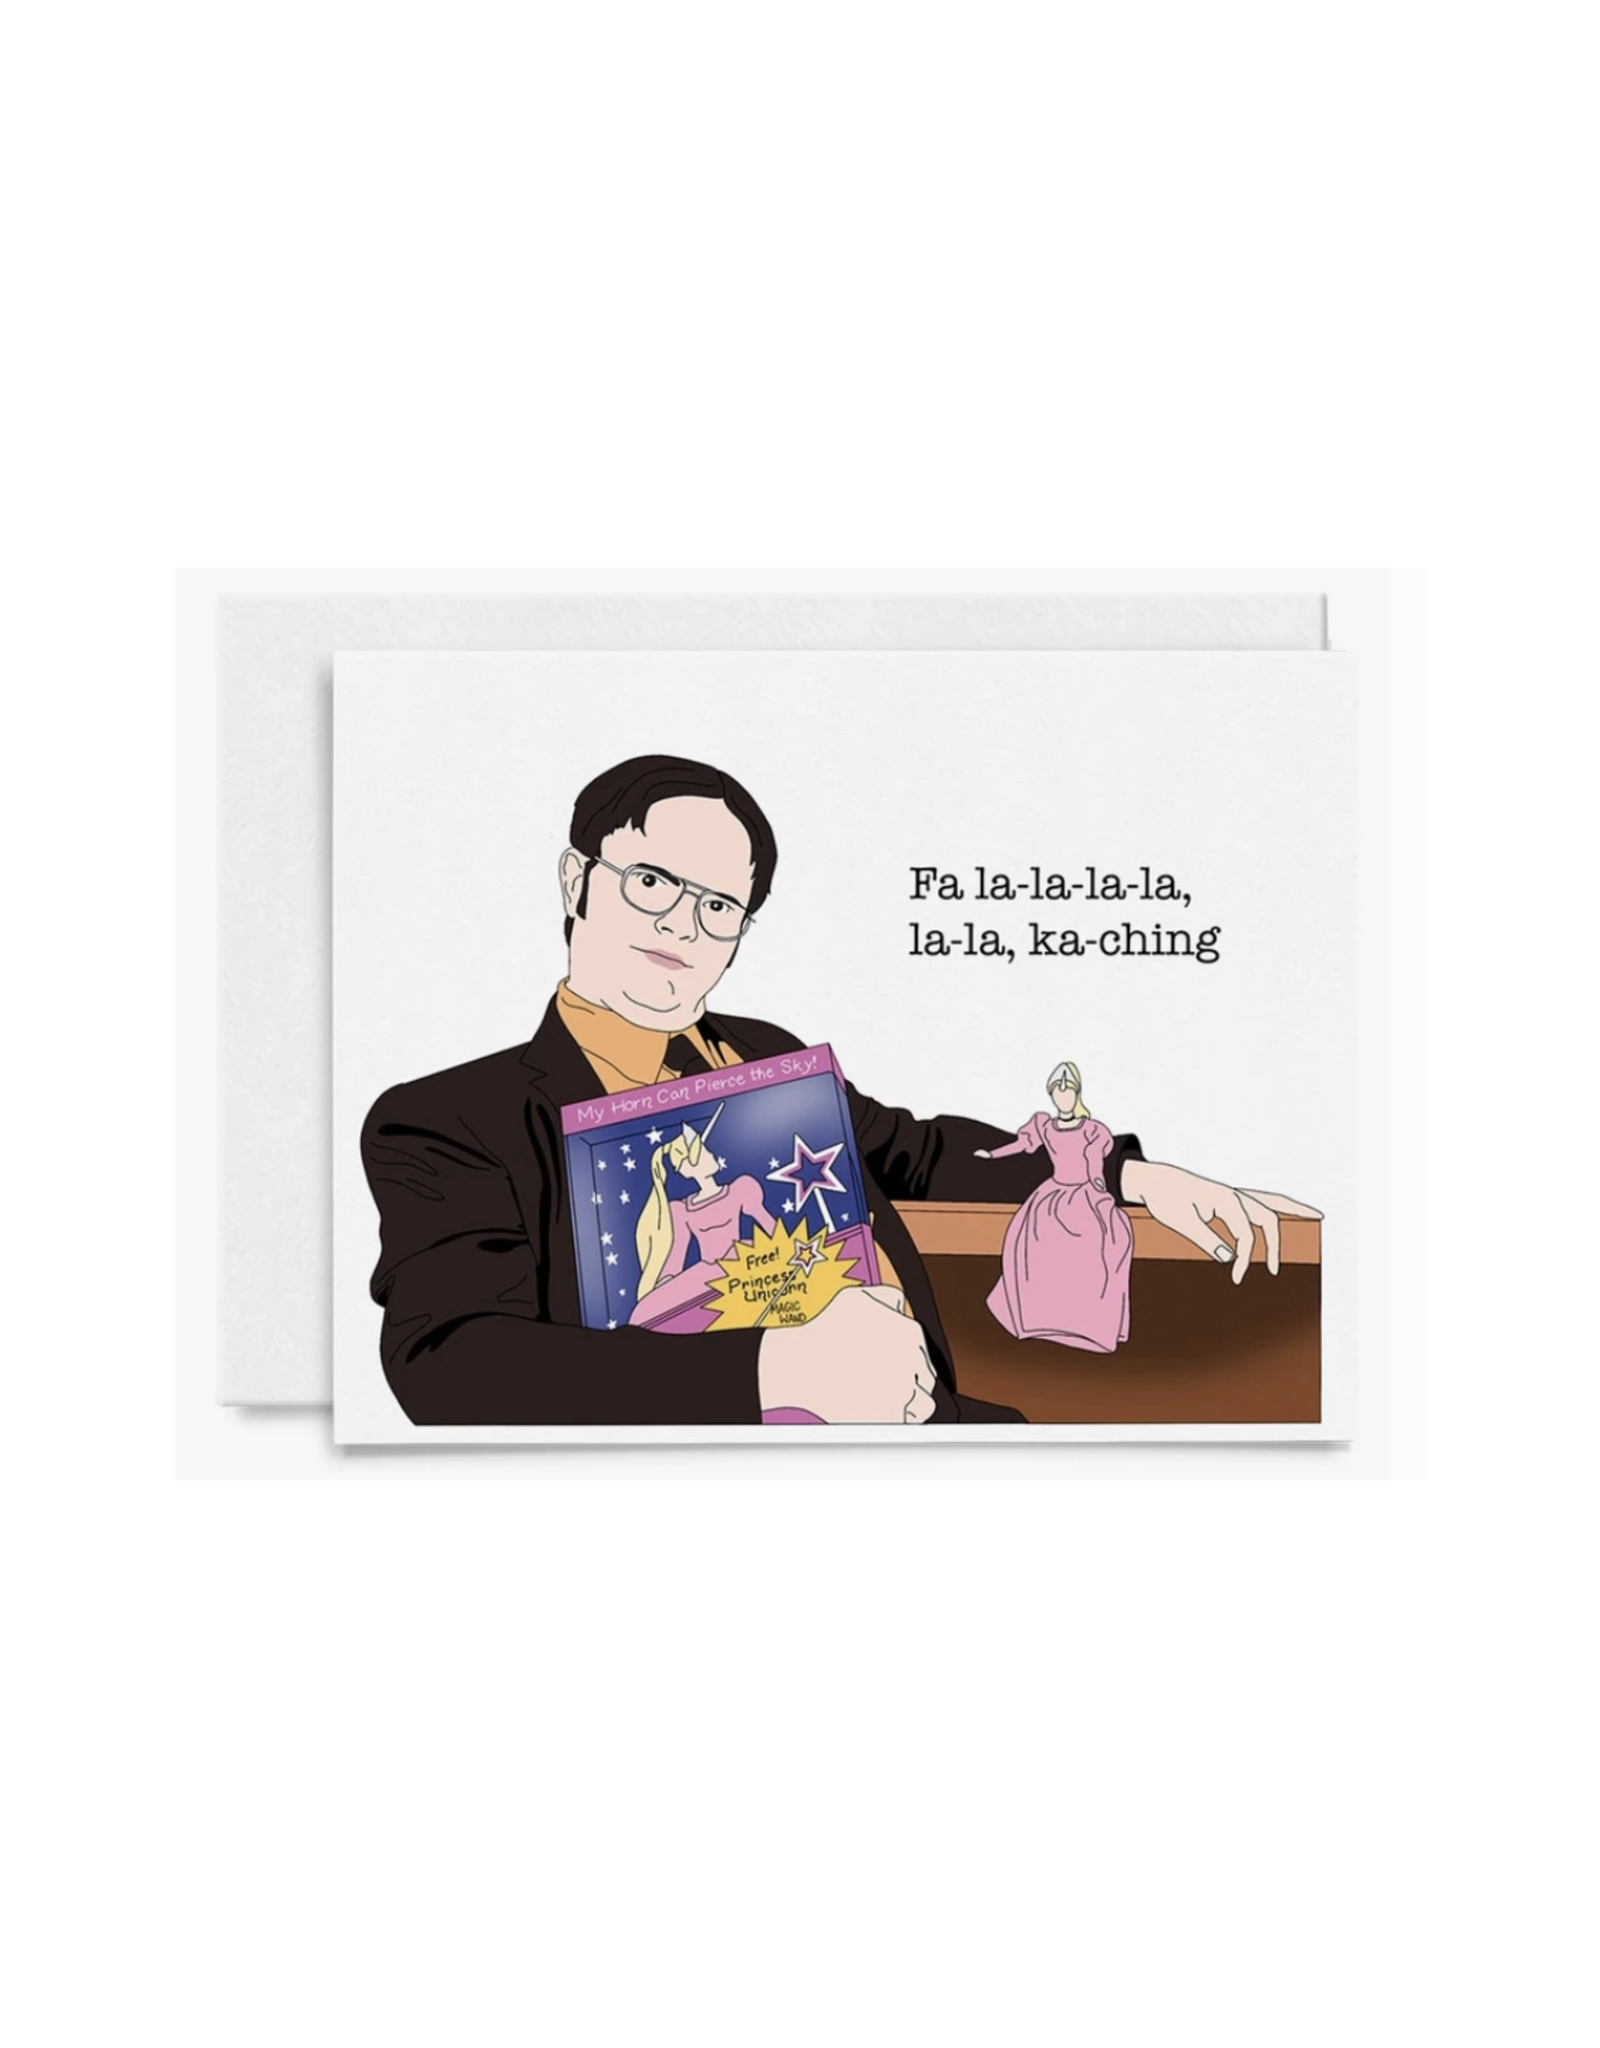 The Office Dwight Princess Sparkle Christmas Greeting Card